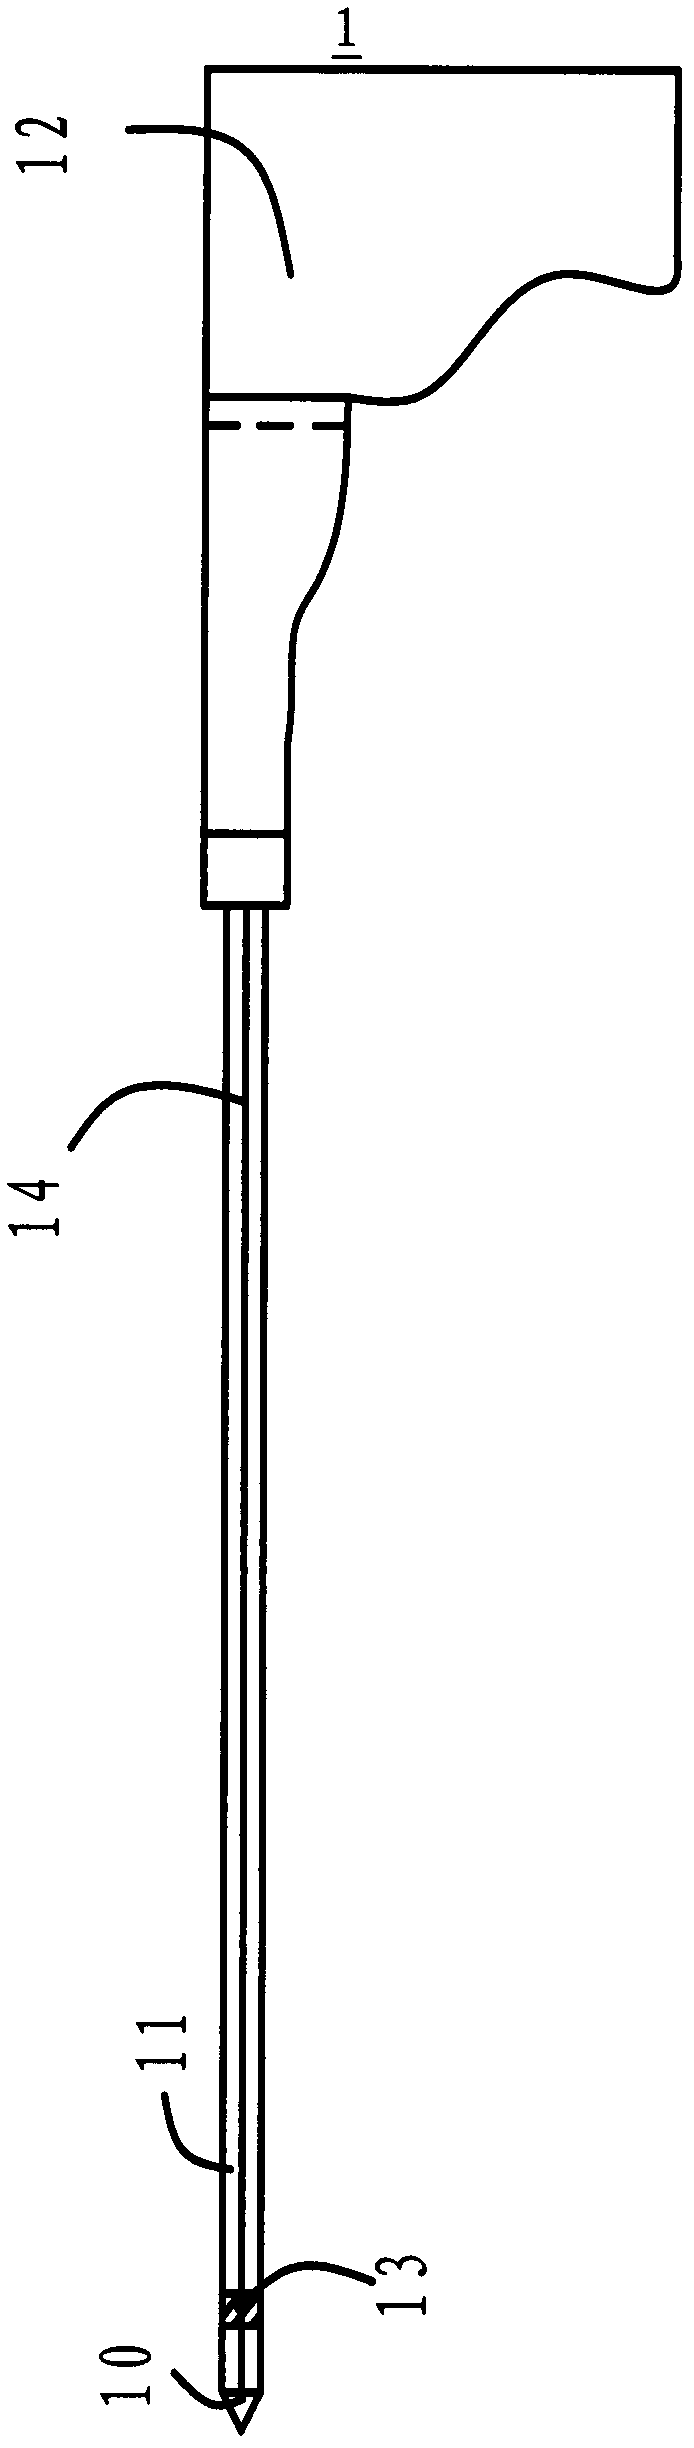 Device and method for recognizing microwave ablation needle